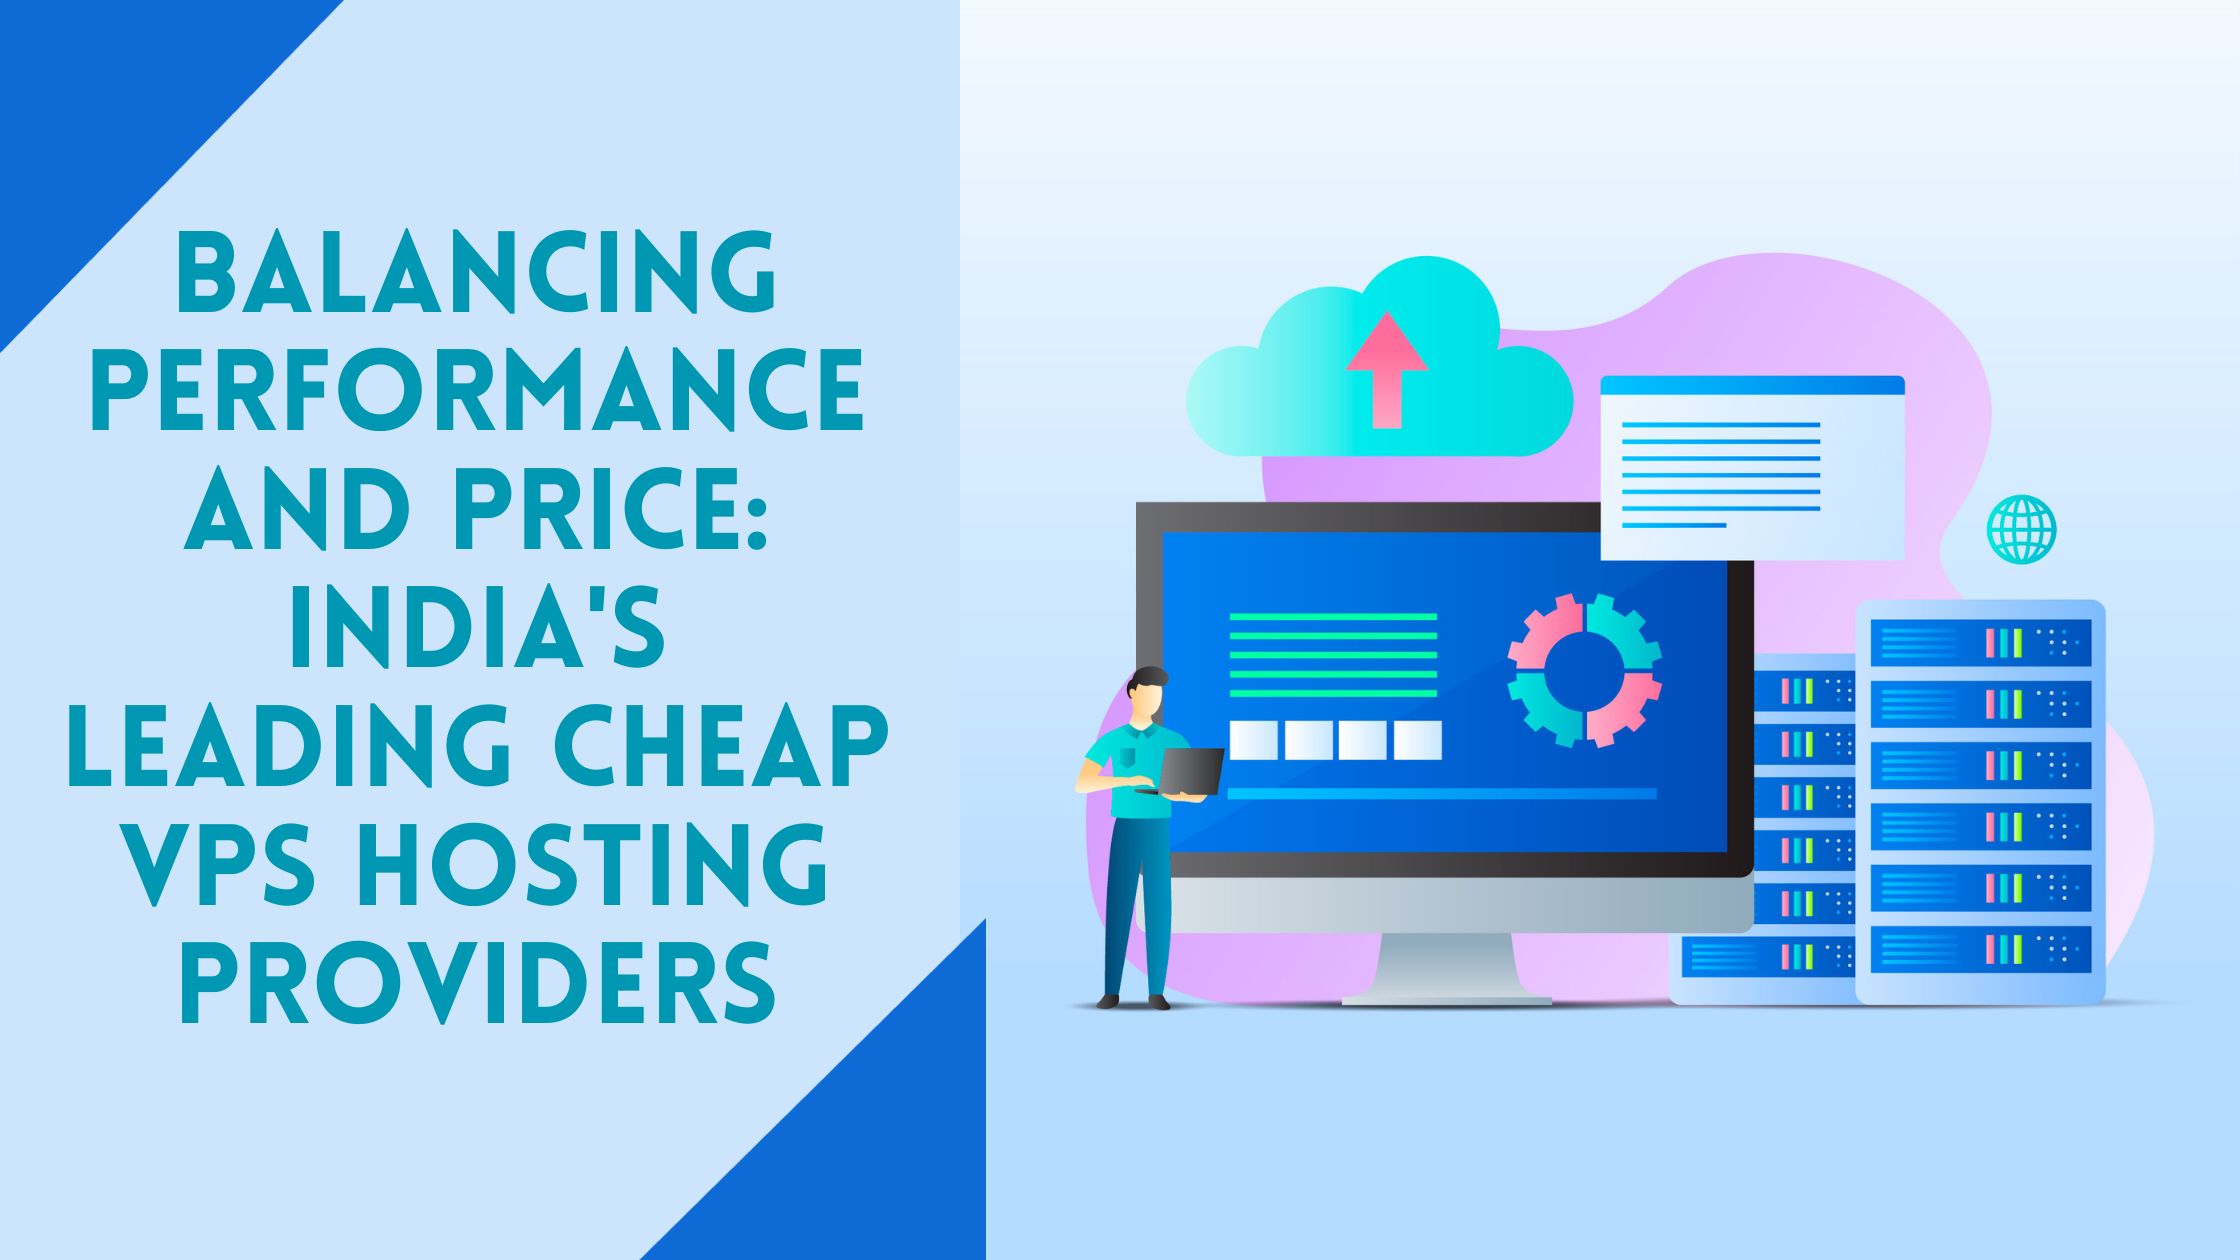 Balancing Performance and Price: India's Leading Cheap VPS Hosting Providers